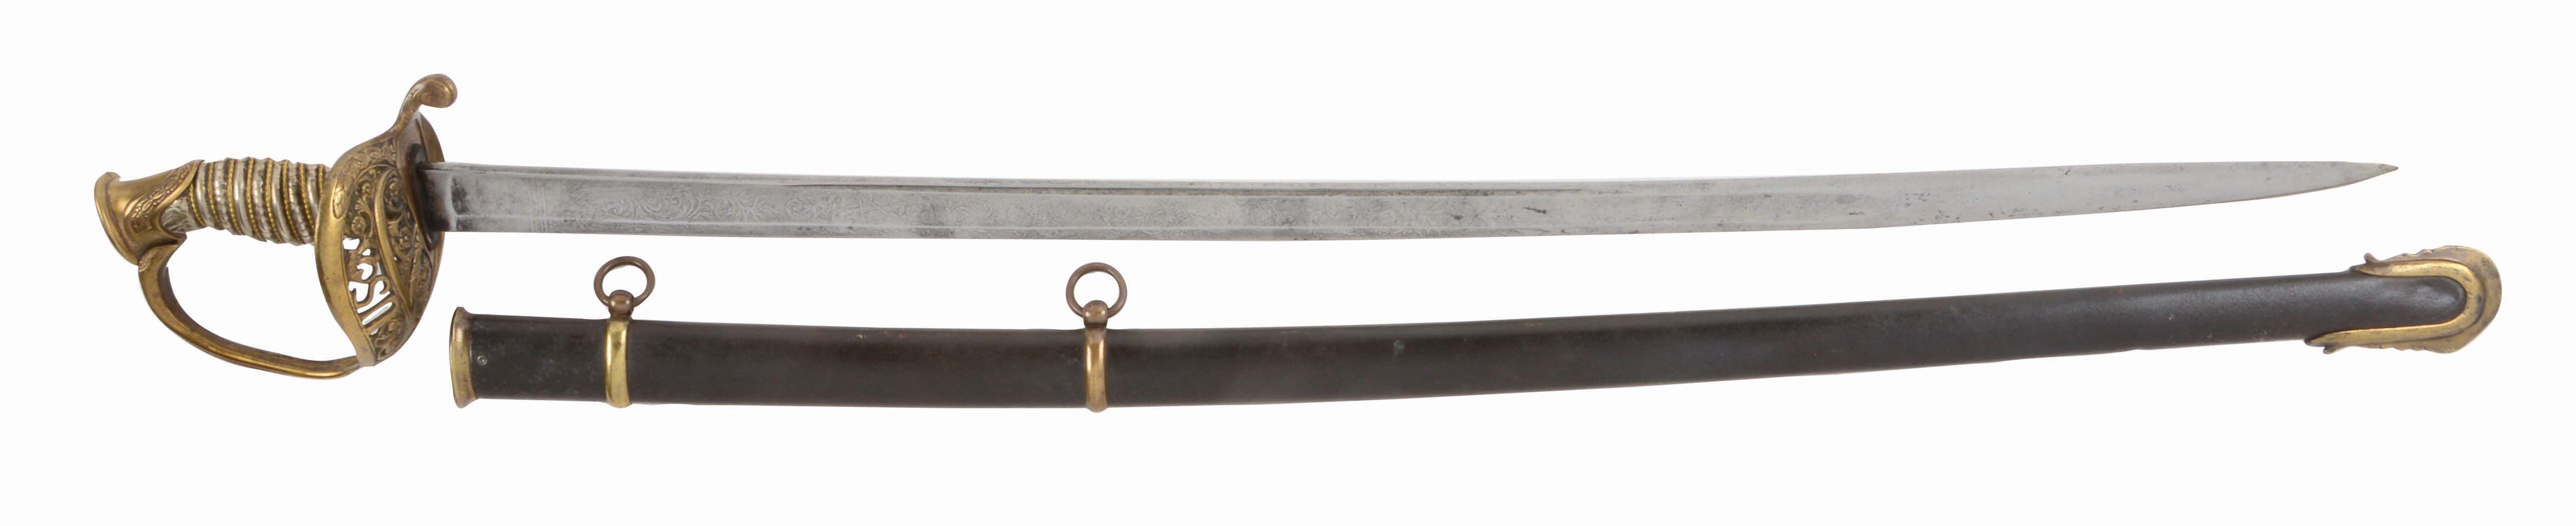 UNITED STATES 1850 STAFF AND FIELD OFFICERS SWORD 